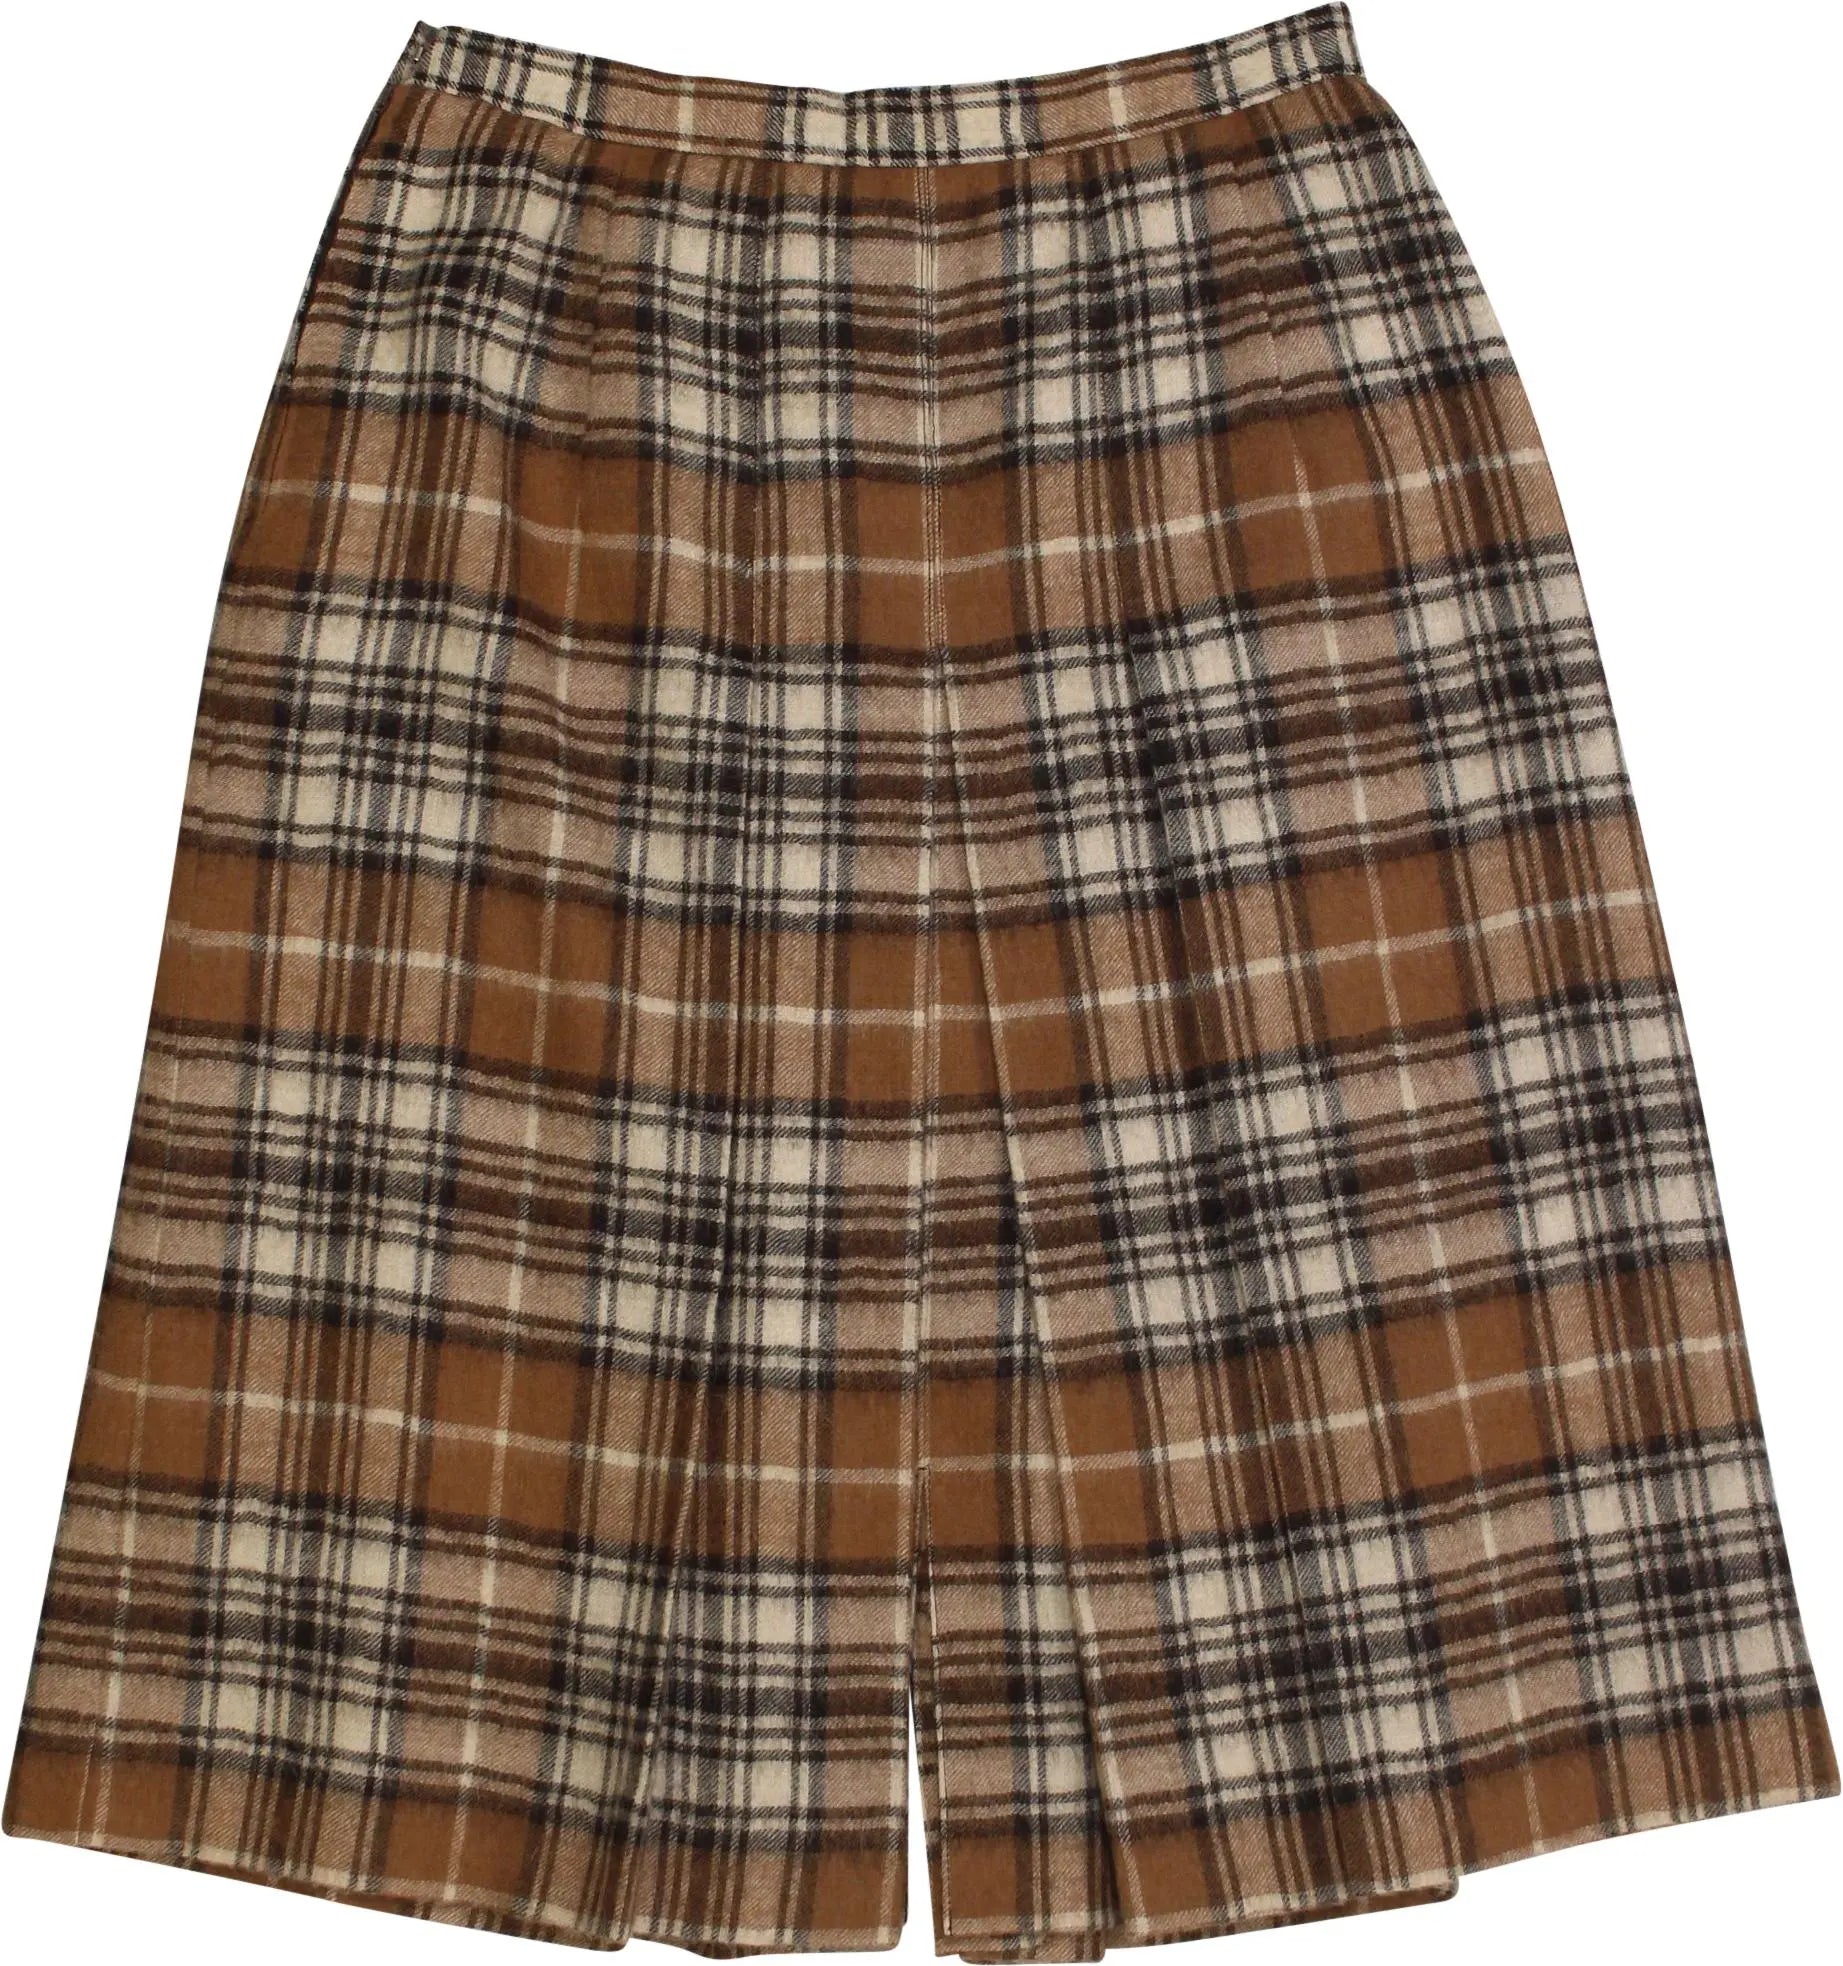 Unknown - Checked Pleated Skirt- ThriftTale.com - Vintage and second handclothing